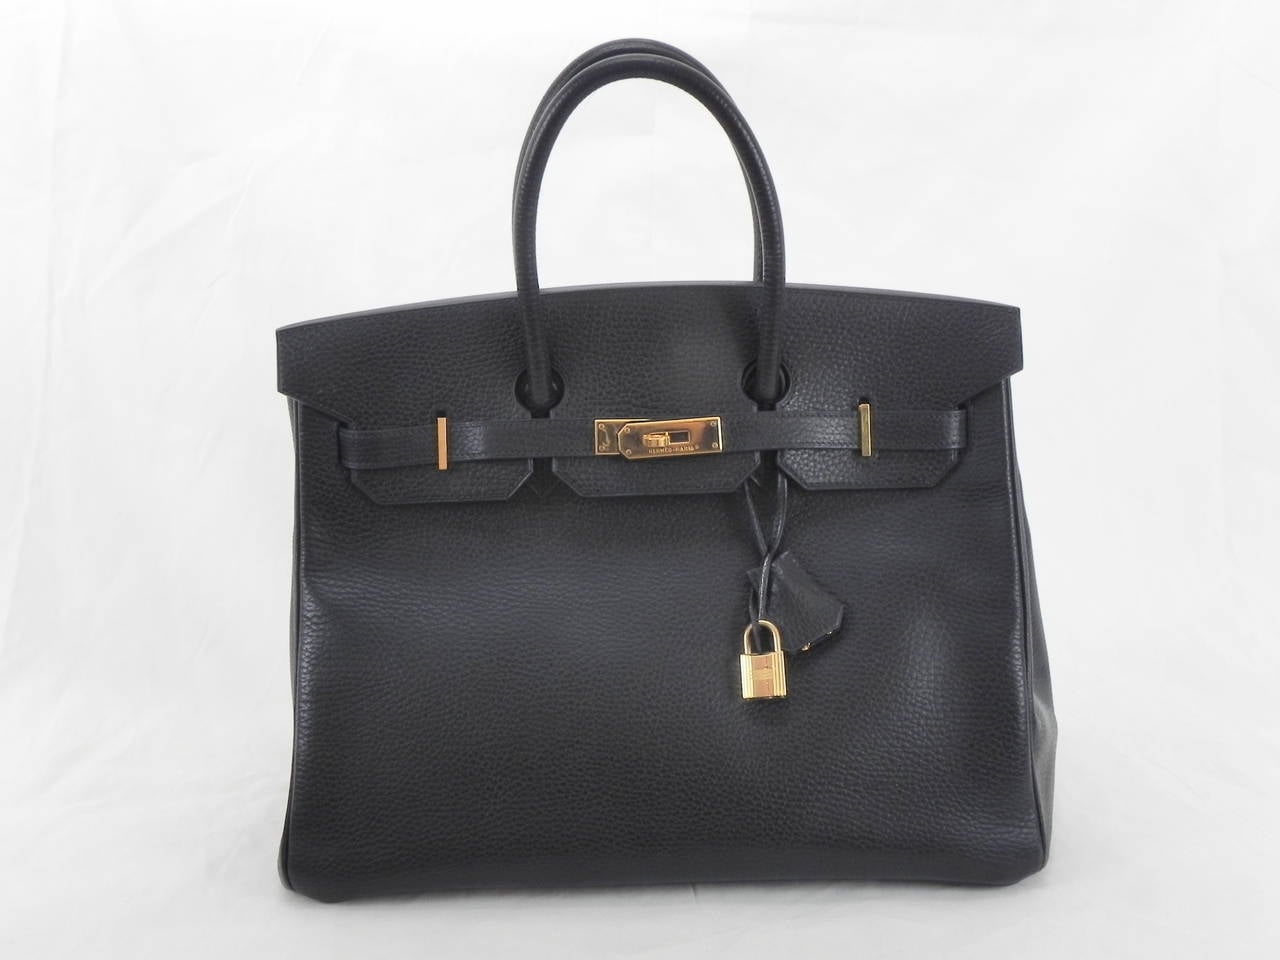 Hermes Black Ardennes 35 cm Birkin Bag with Gold Hardware ,
Circa :2003 .G Square Year .
Dimensions :13 3/4 L x 7 w x 10 H .

Very Good Condition .Comes with Hermes Dust bag .

No scruff marks and Generally in excellent condition with minimal